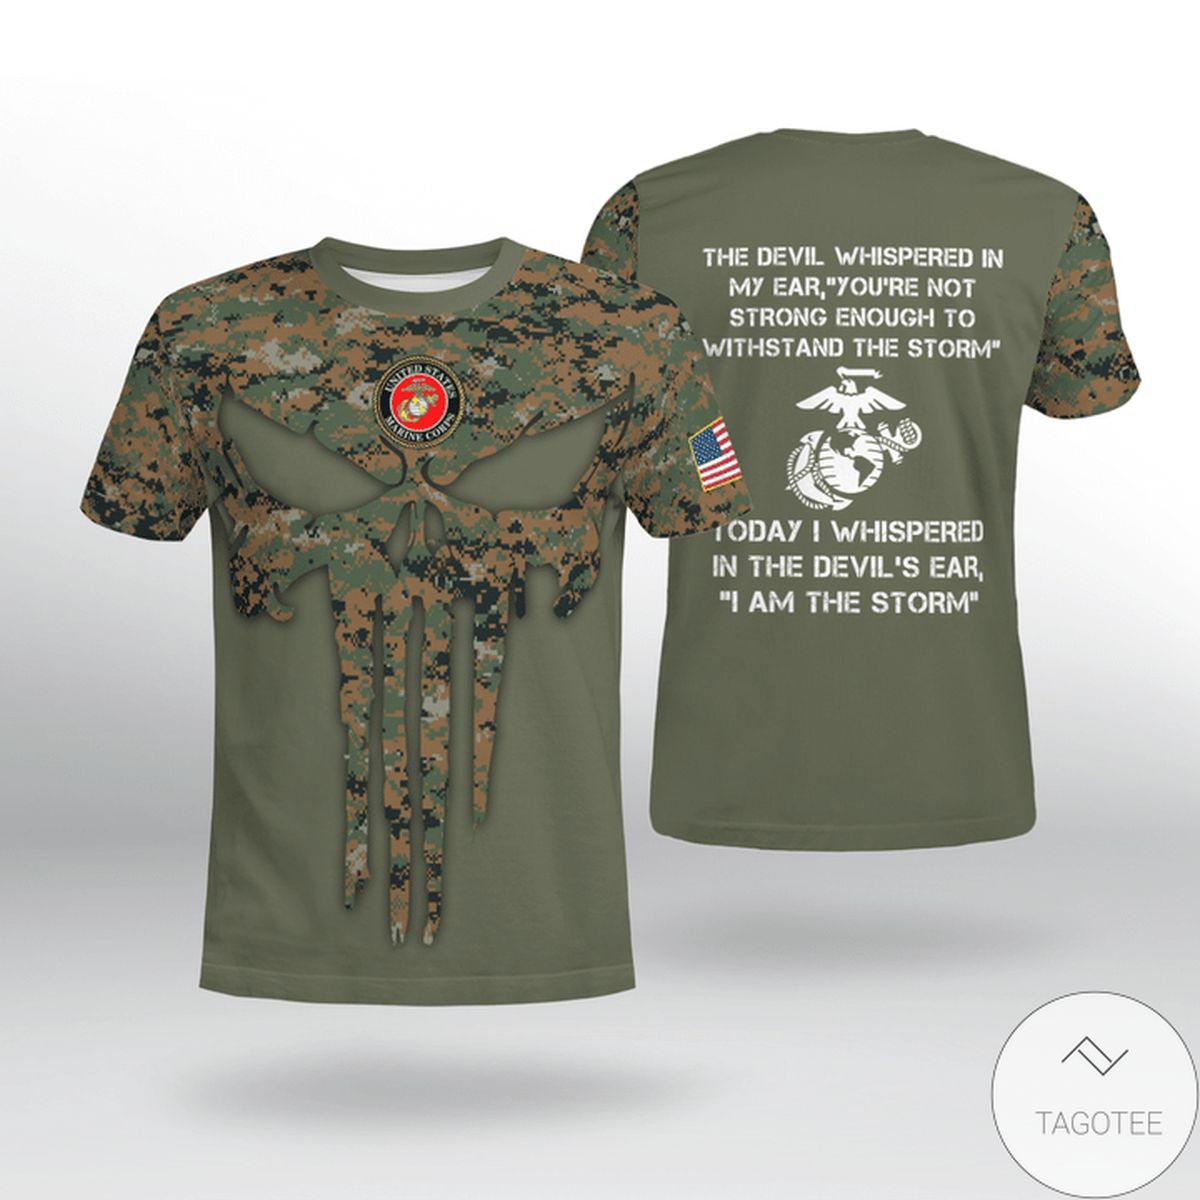 USMC The Devil Whispered In My Ear You Are Not Strong Enough To Withstand The Storm Shirt